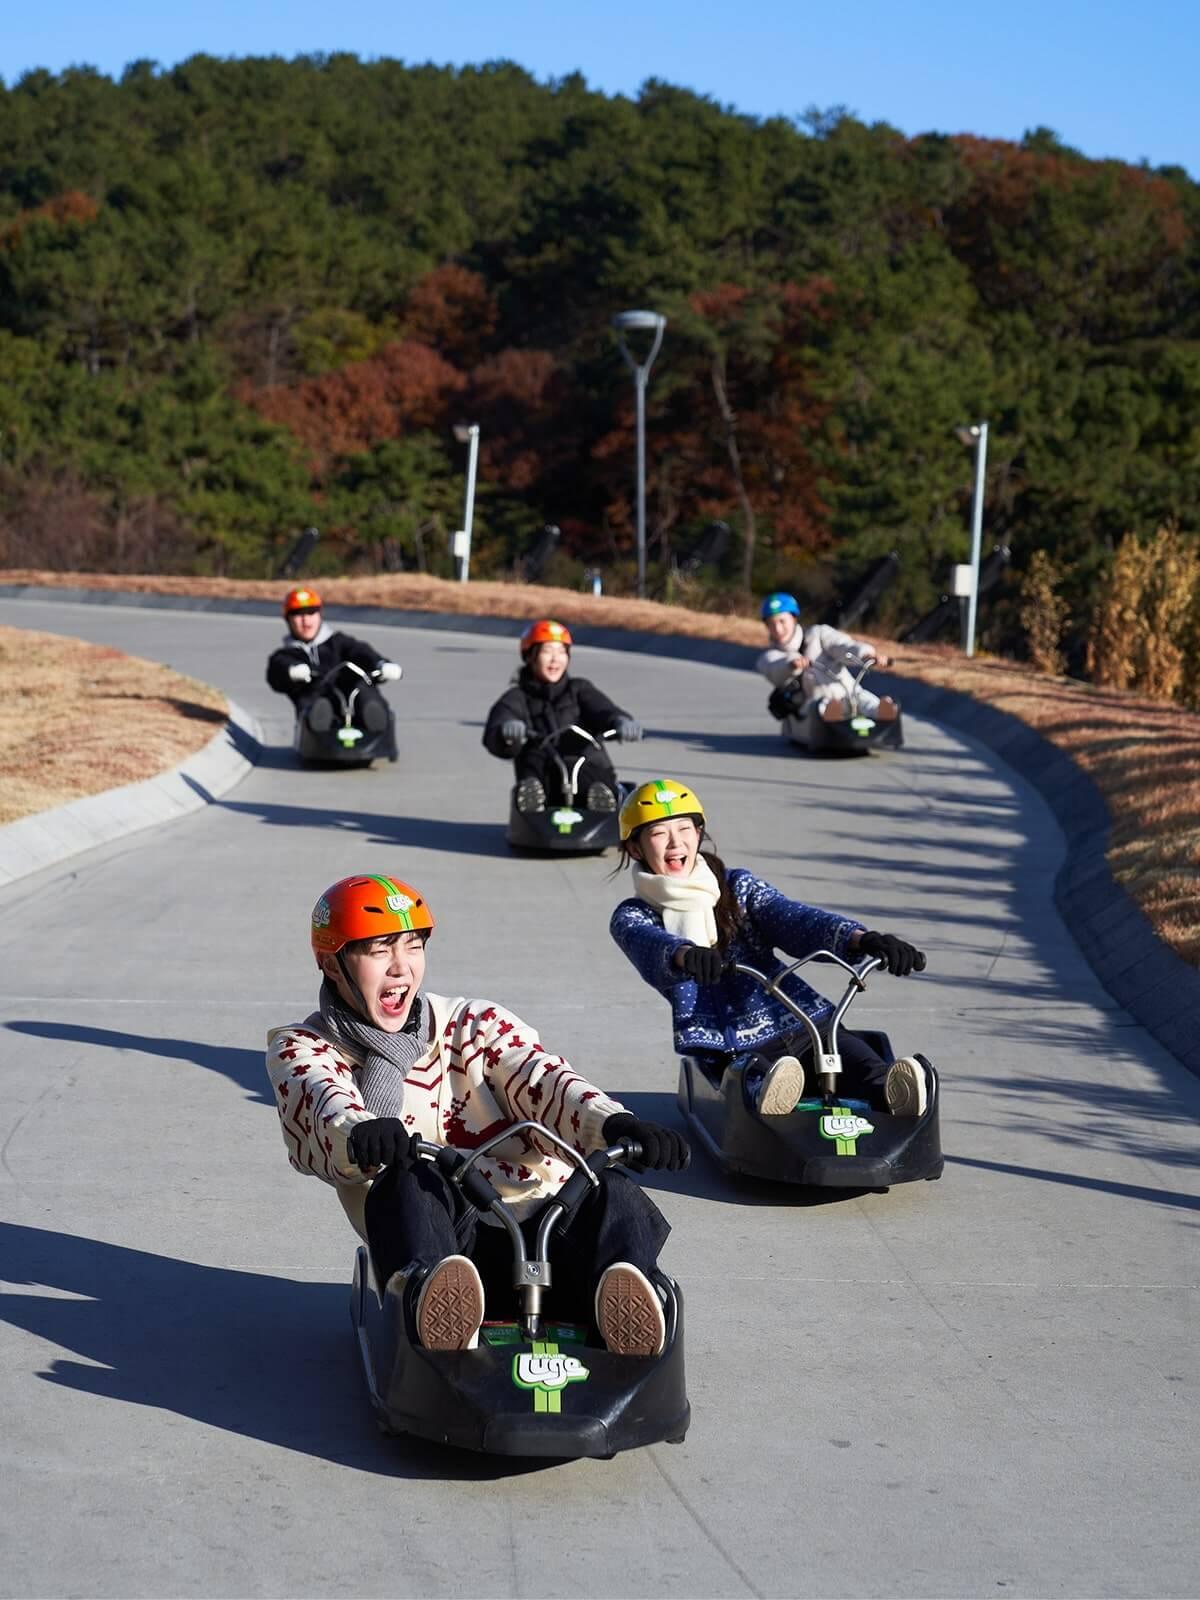 A group of people scream with excitement as they corner on the Luge track.